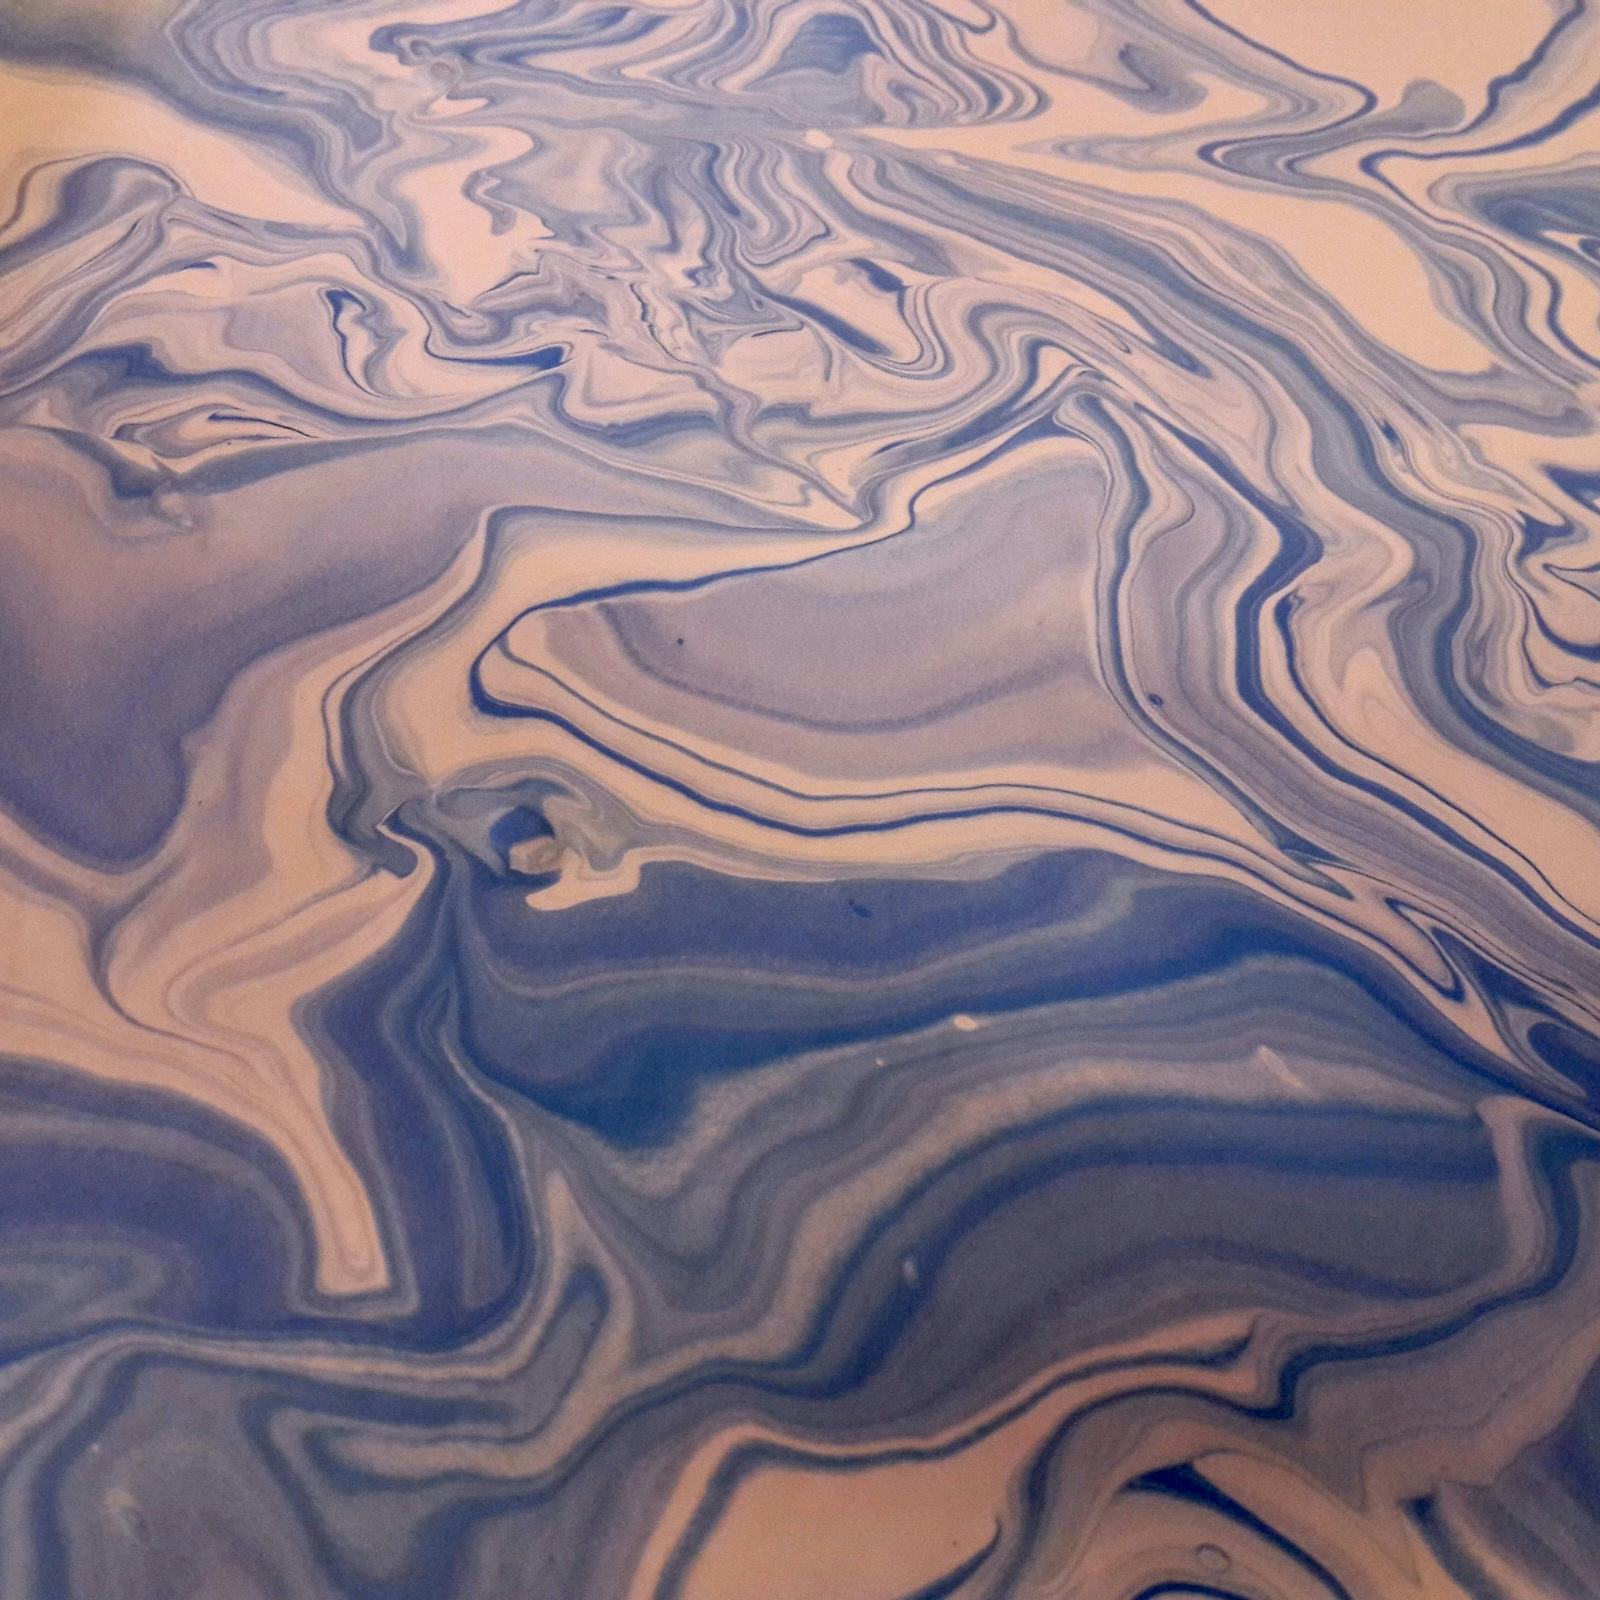 Detail of a marbled glaze